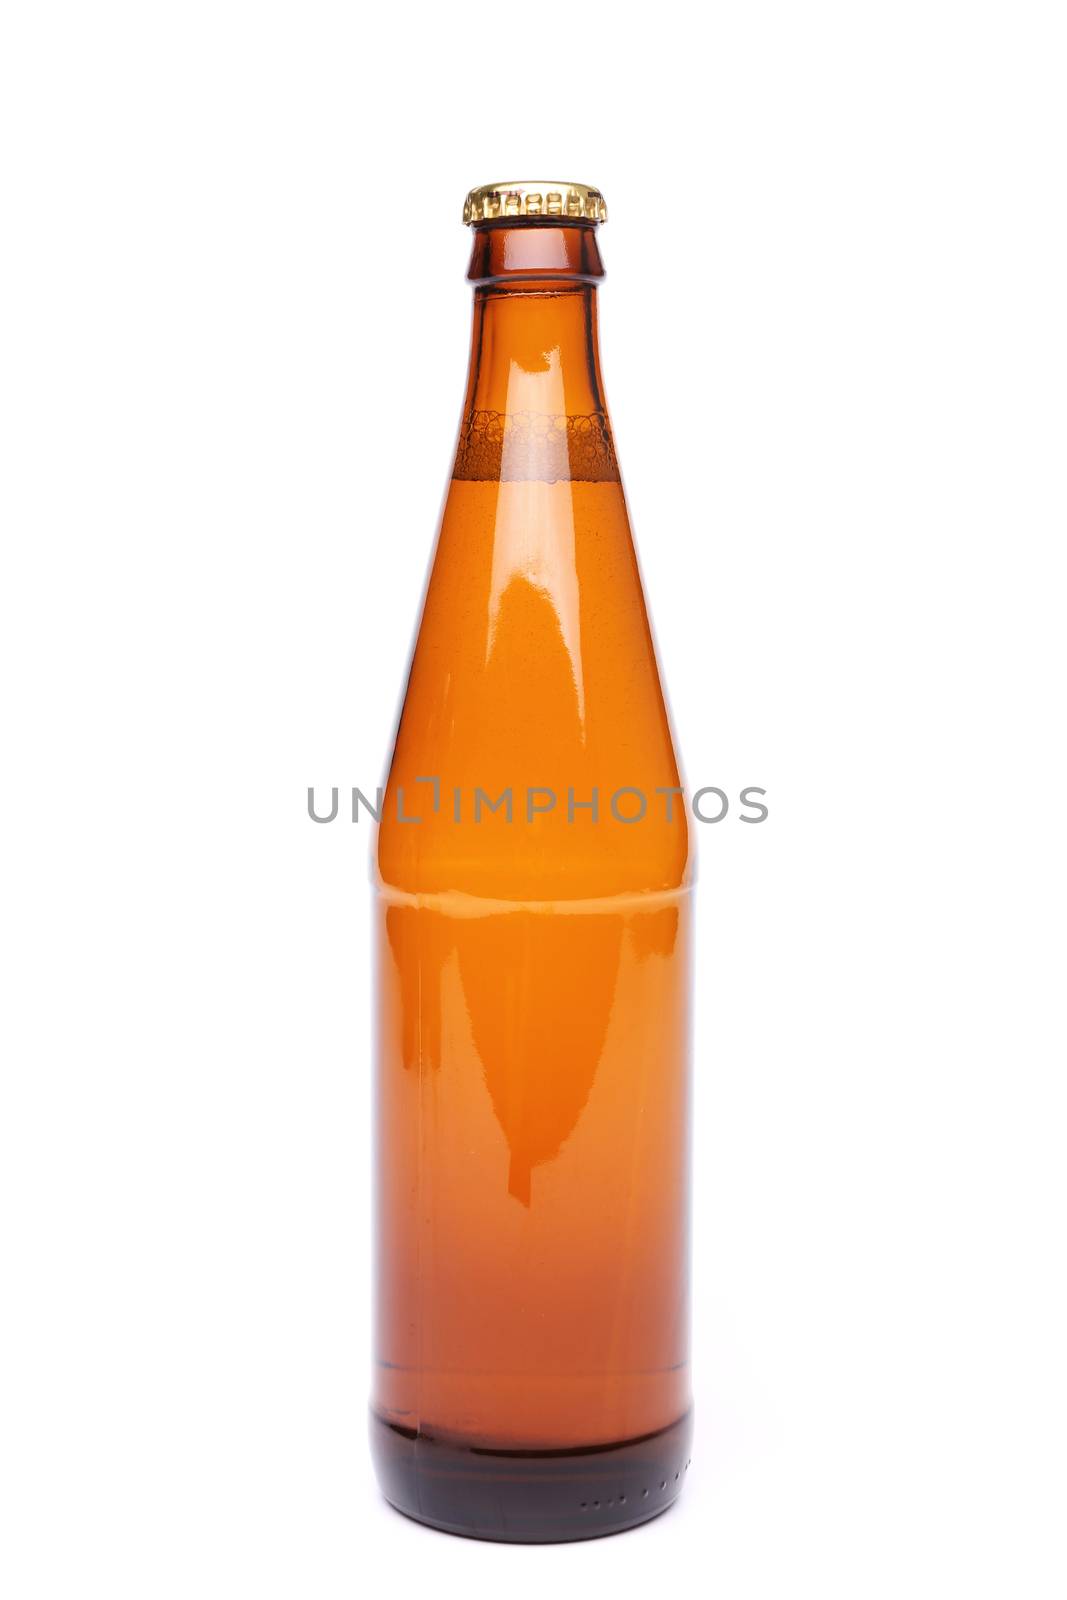 A brown bottle with drink on white background. by indigolotos